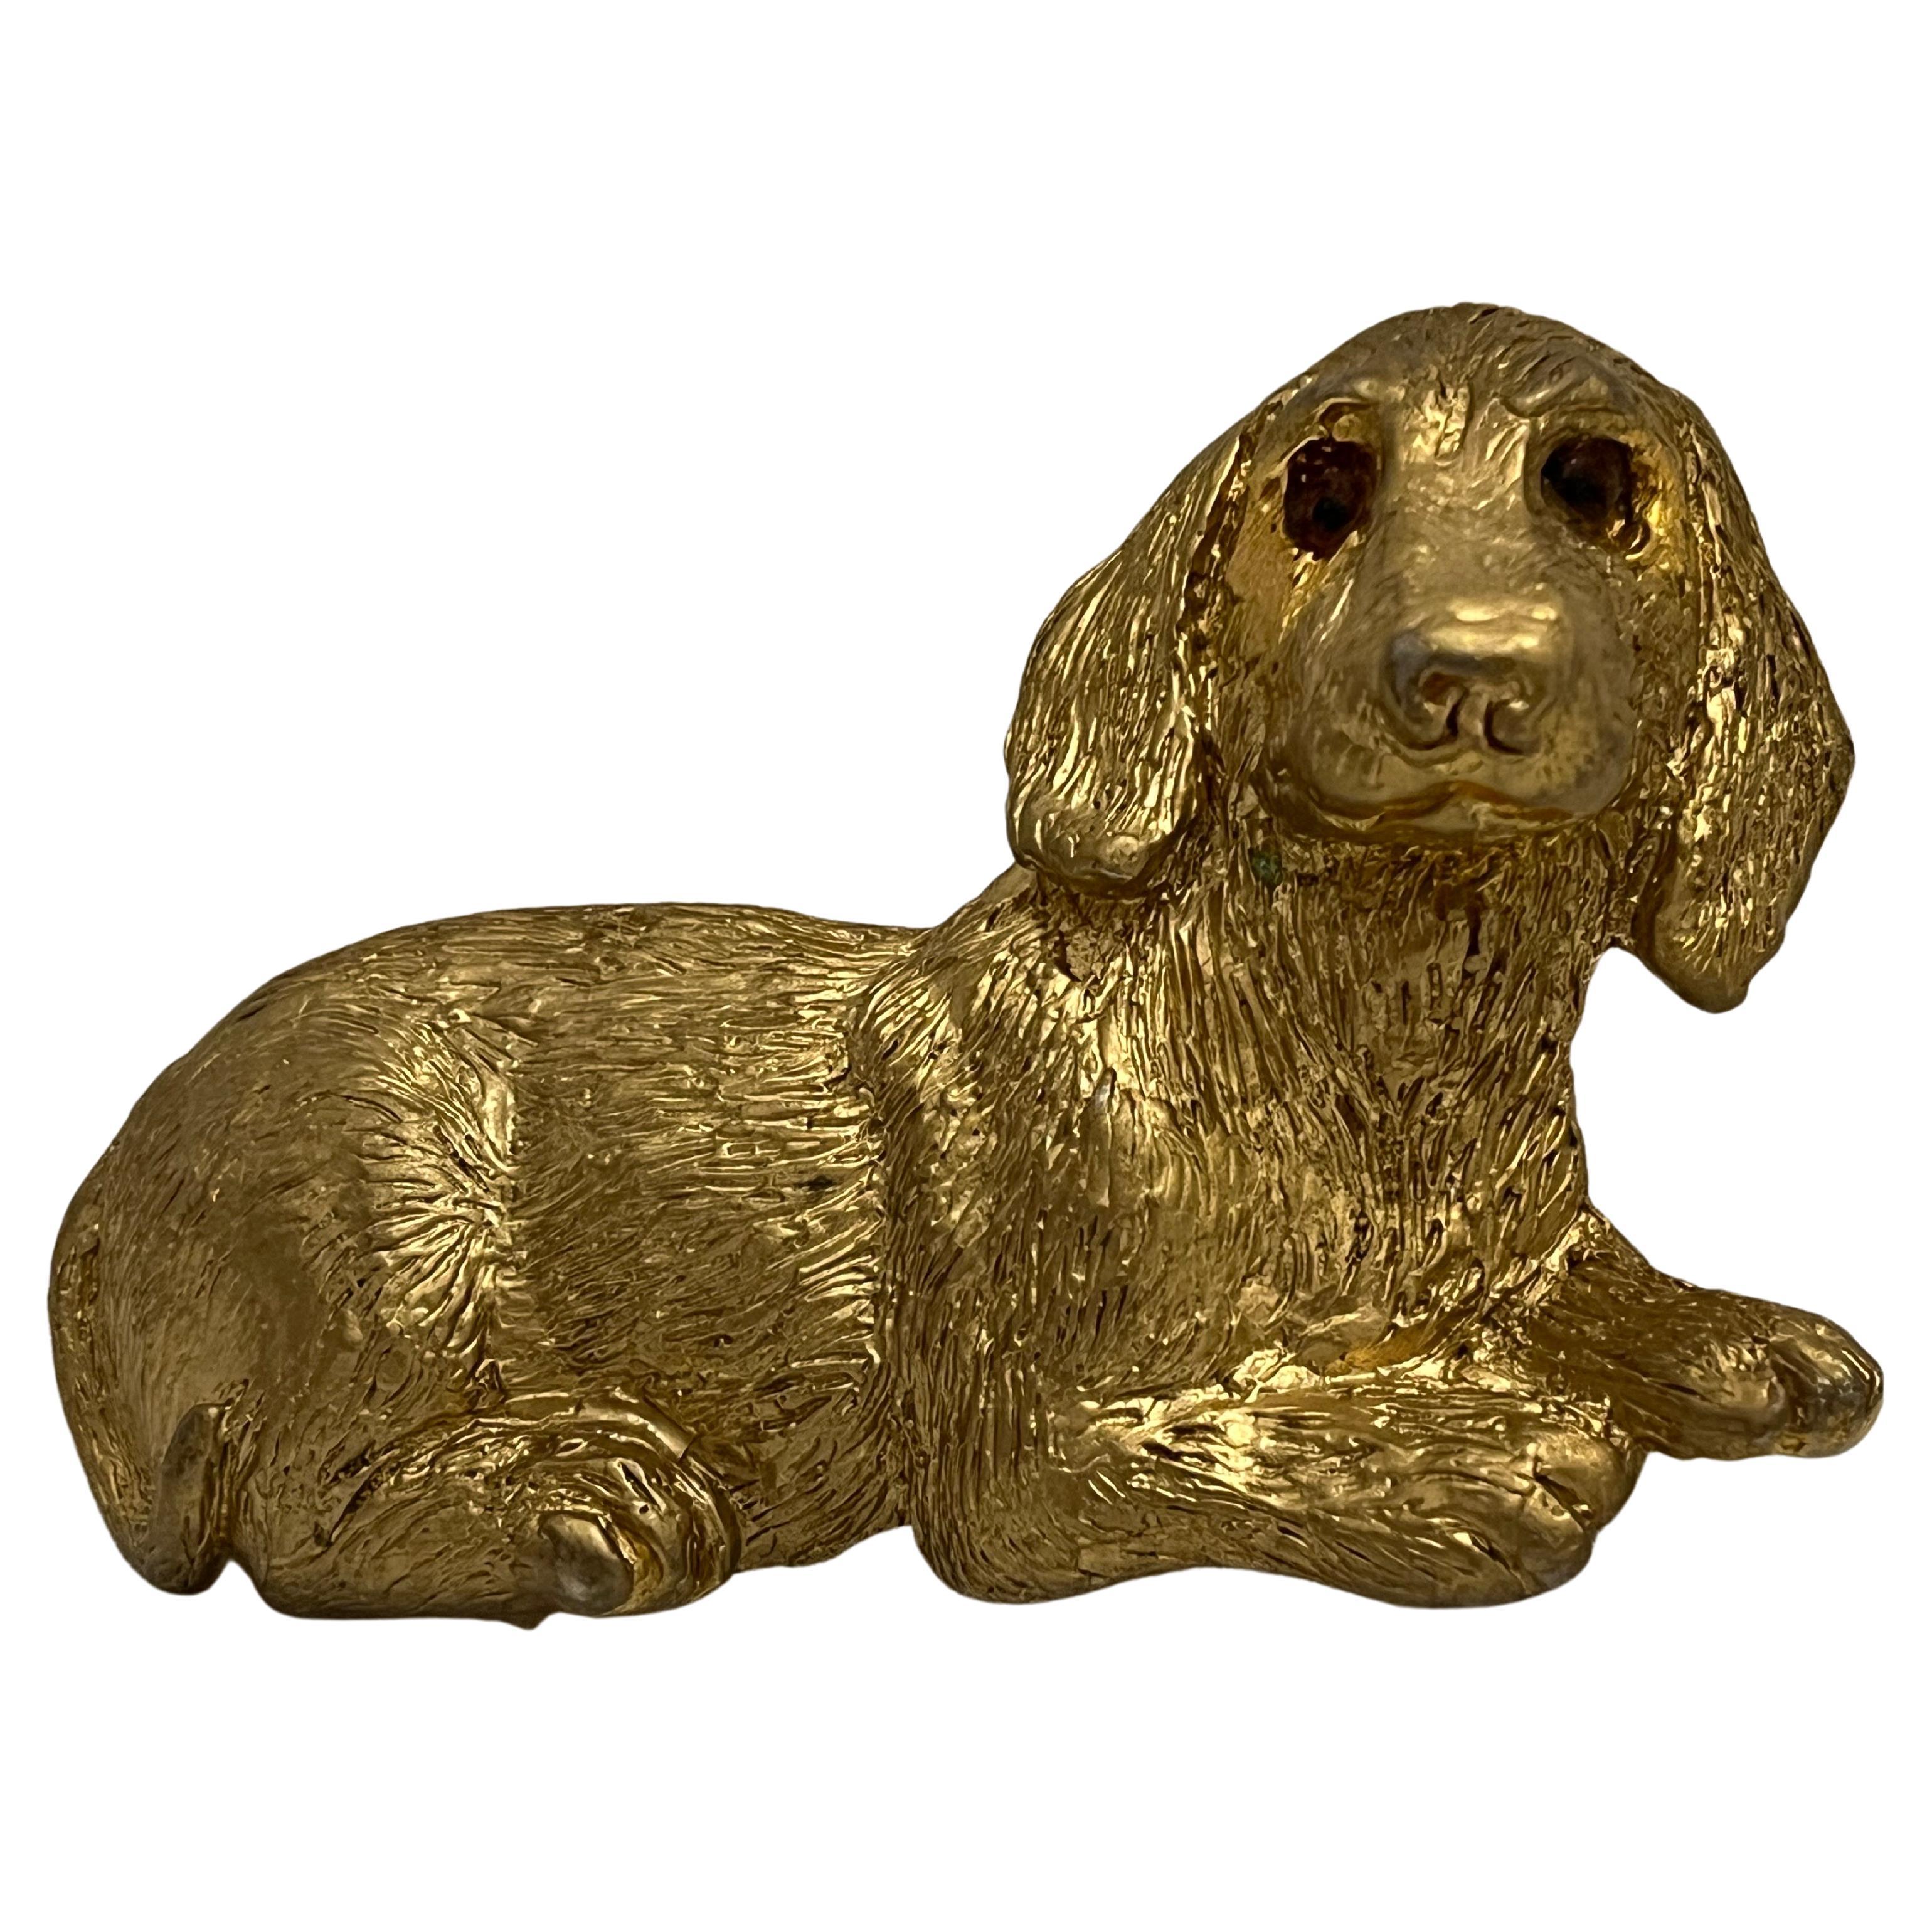 A gorgeous and oh so adorable dachshund makes for an ultra chic belt buckle by none other than famed Italian designer Mimi di N. You're not seeing double, I have two of these fabulous buckles listed separetely so please view my storefront for the